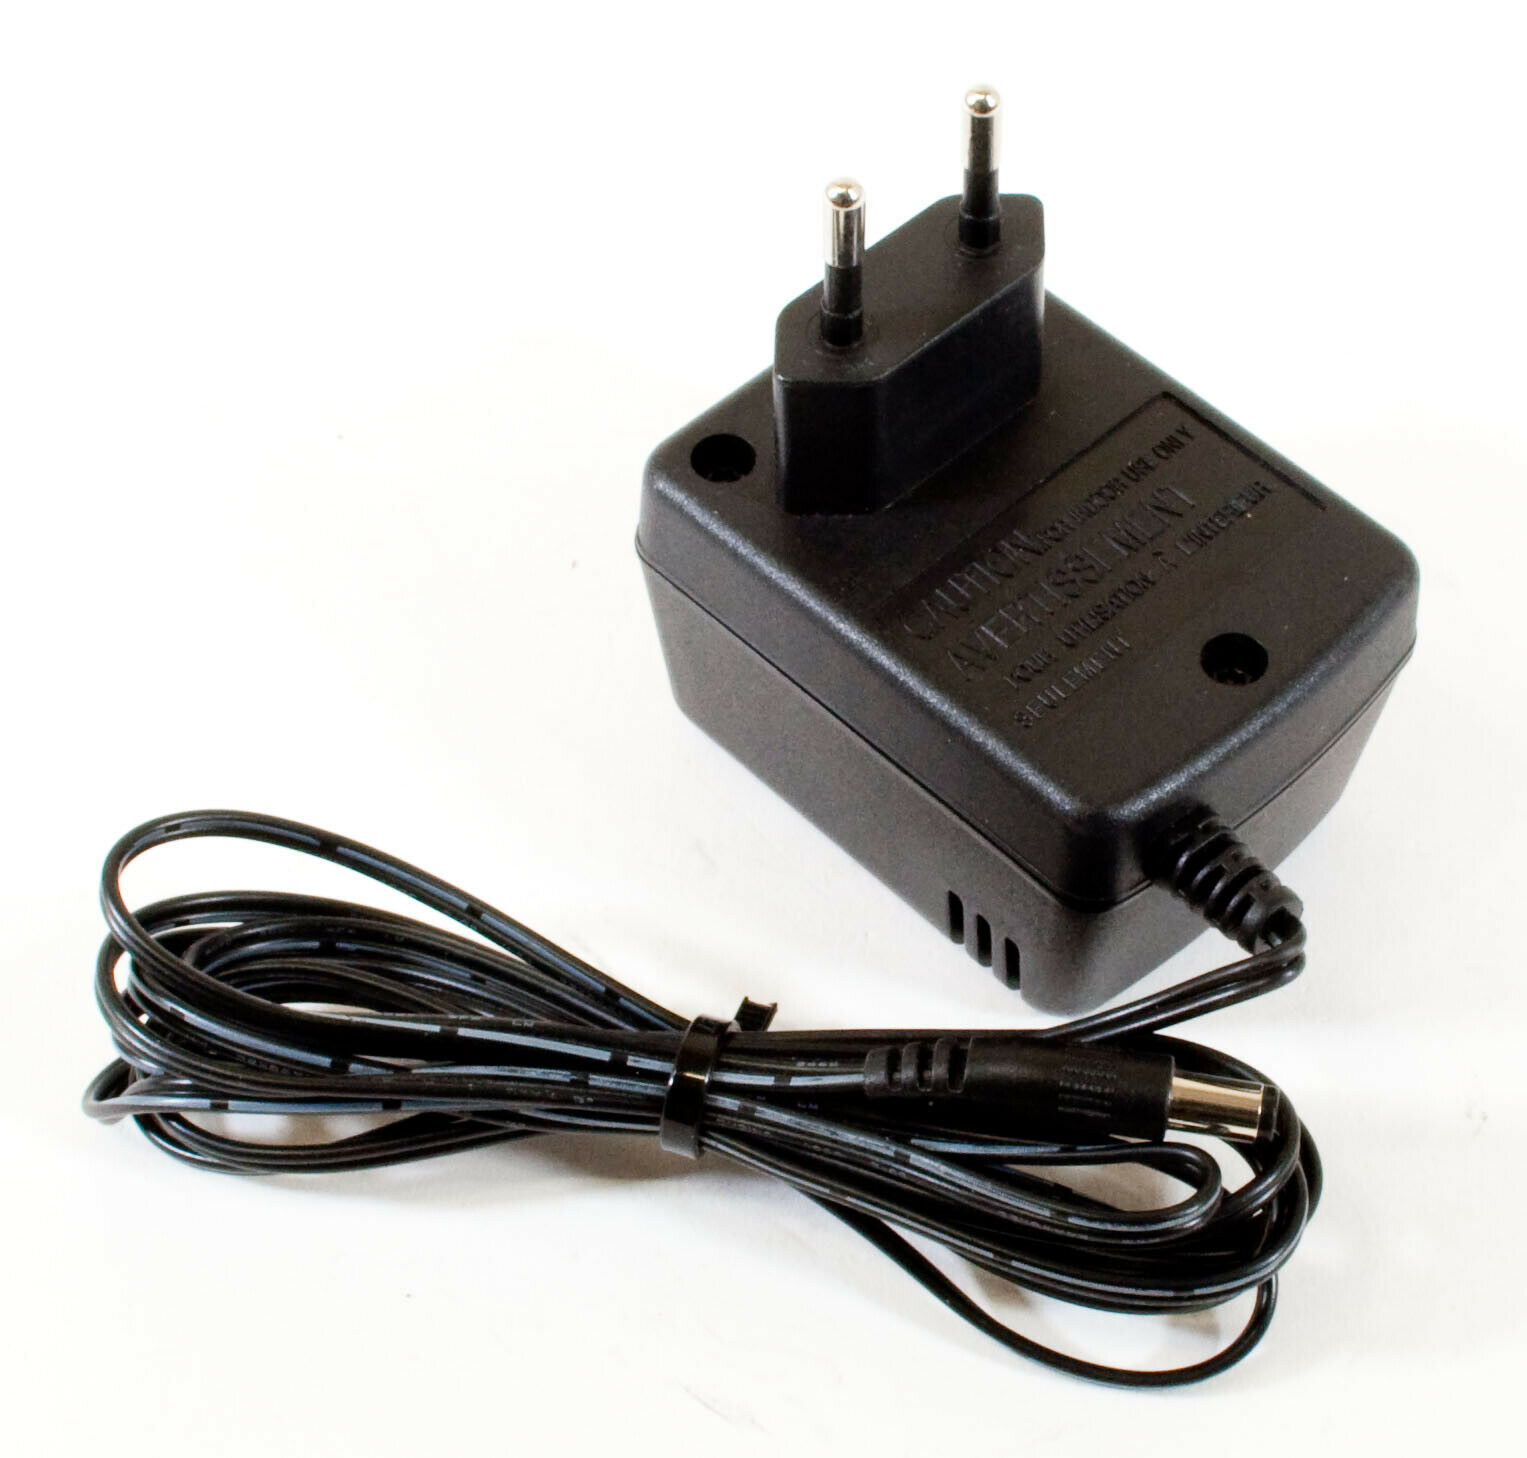 12V AC/DC Adapter Charger For Casio CDP-230 CDP-230R Digital Piano Power Supply Cable Length: 4ft./1.2M Color: Black I